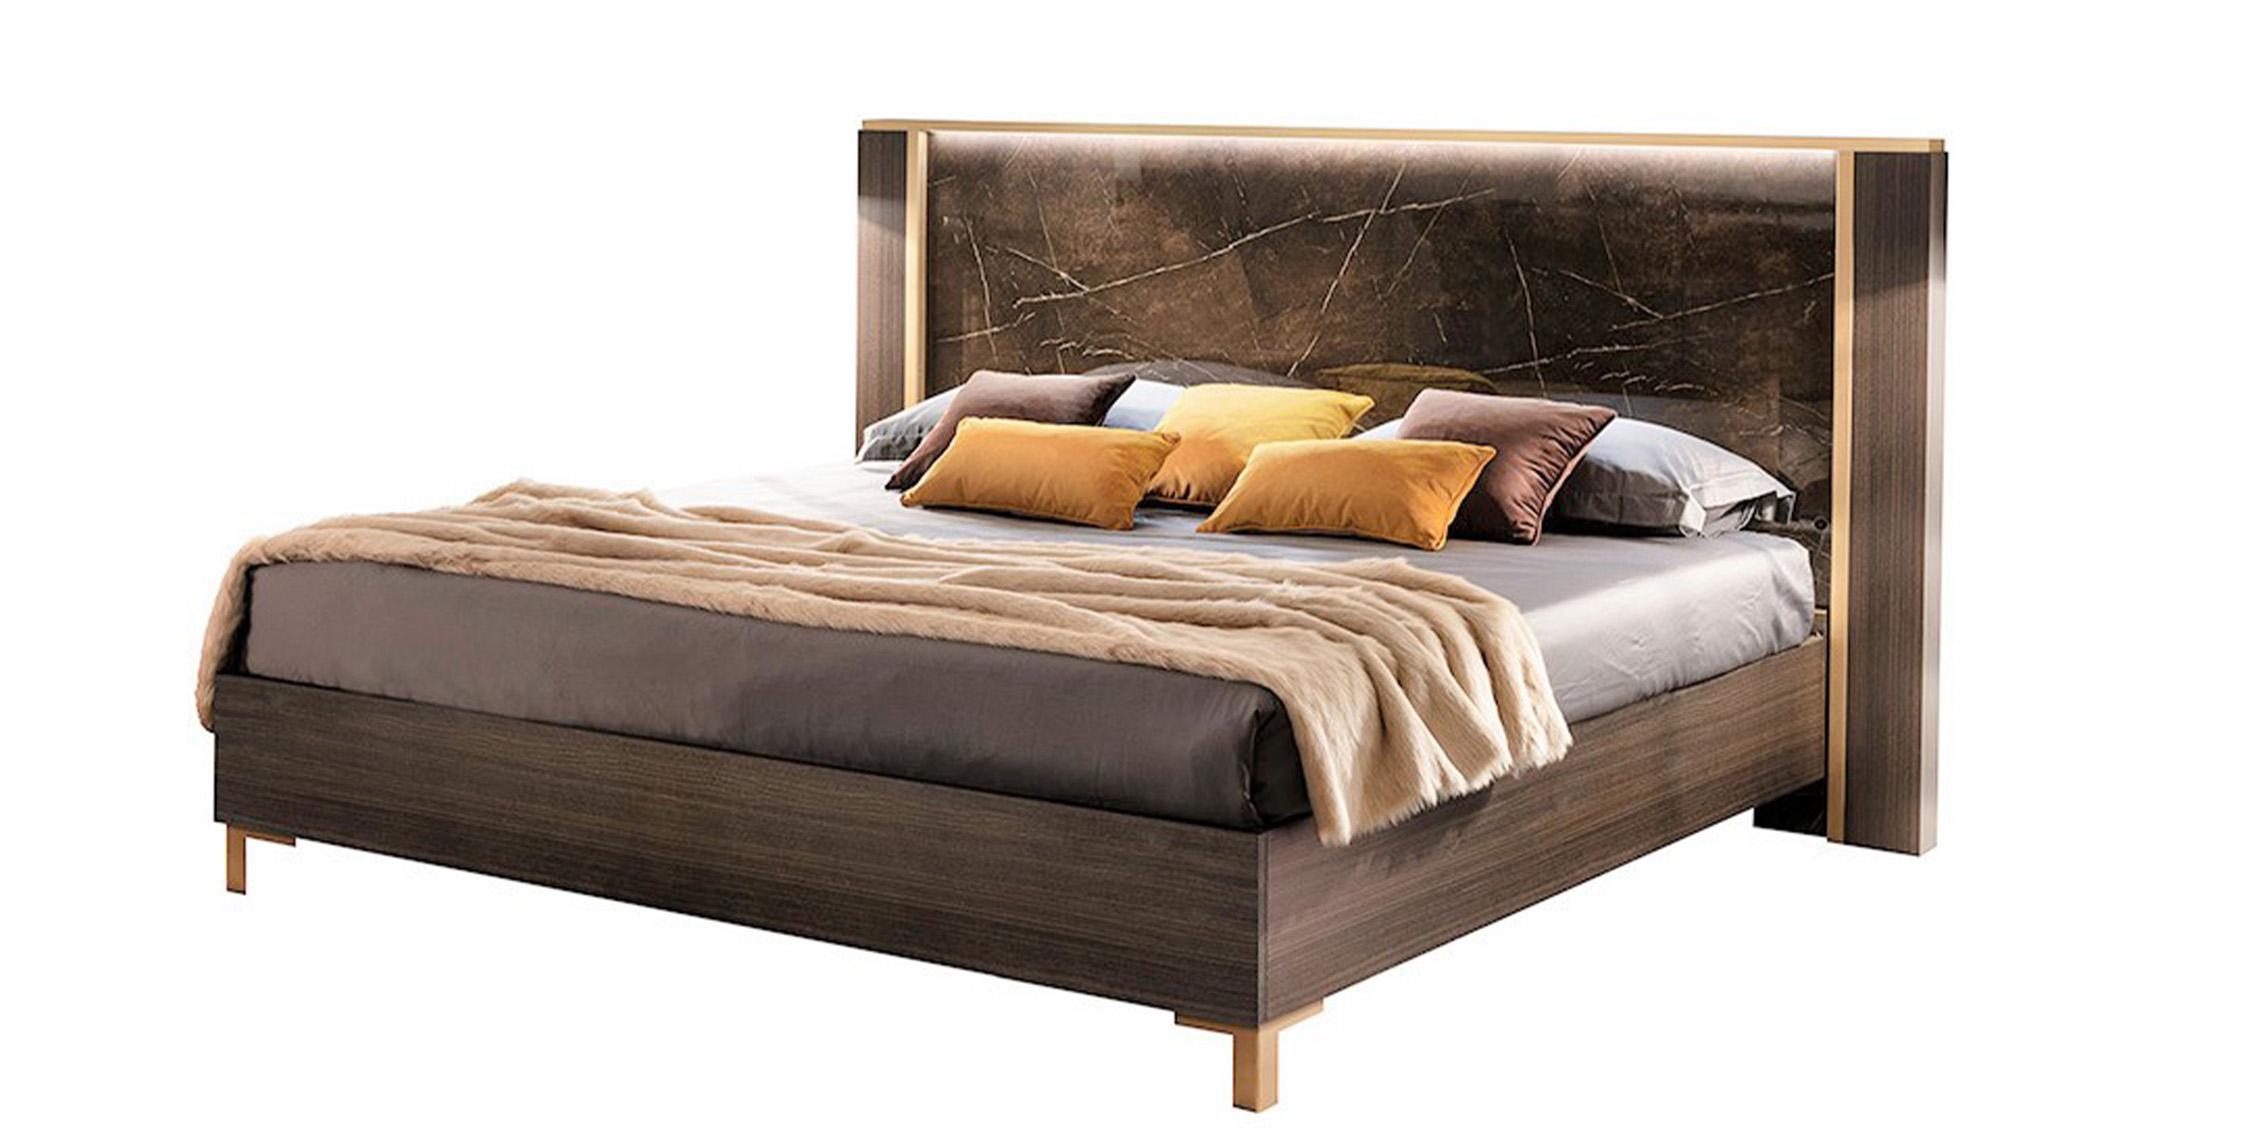 

    
Luxury Shiny Brown Marble-finish Queen Bed ESSENZA ESF Made in Italy Modern
